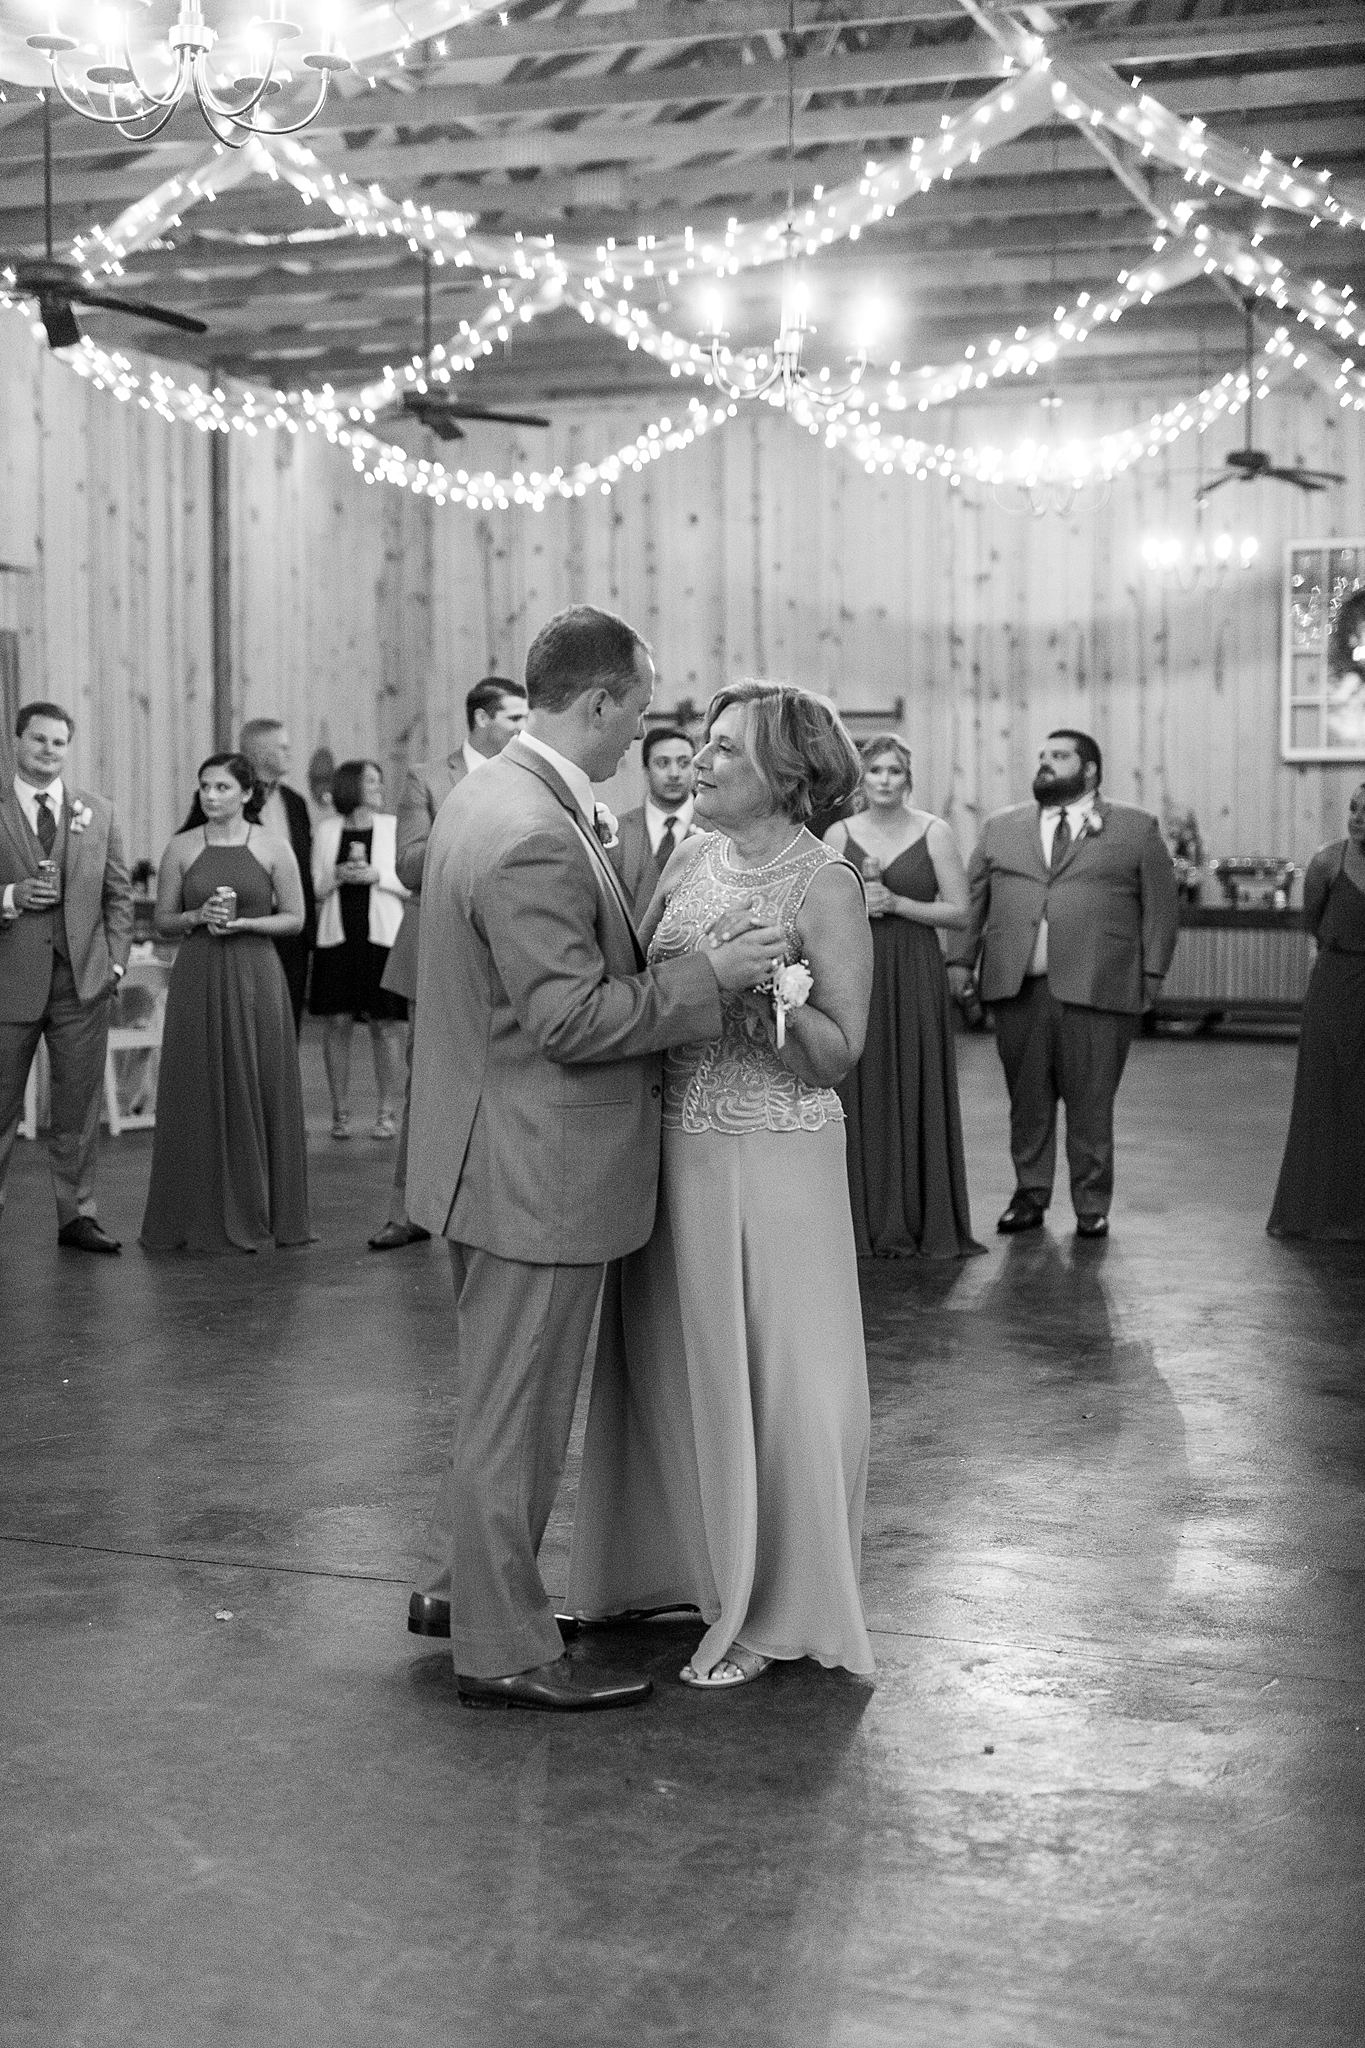 groom dances with mother during wedding reception in barn with twinkle lights hanging